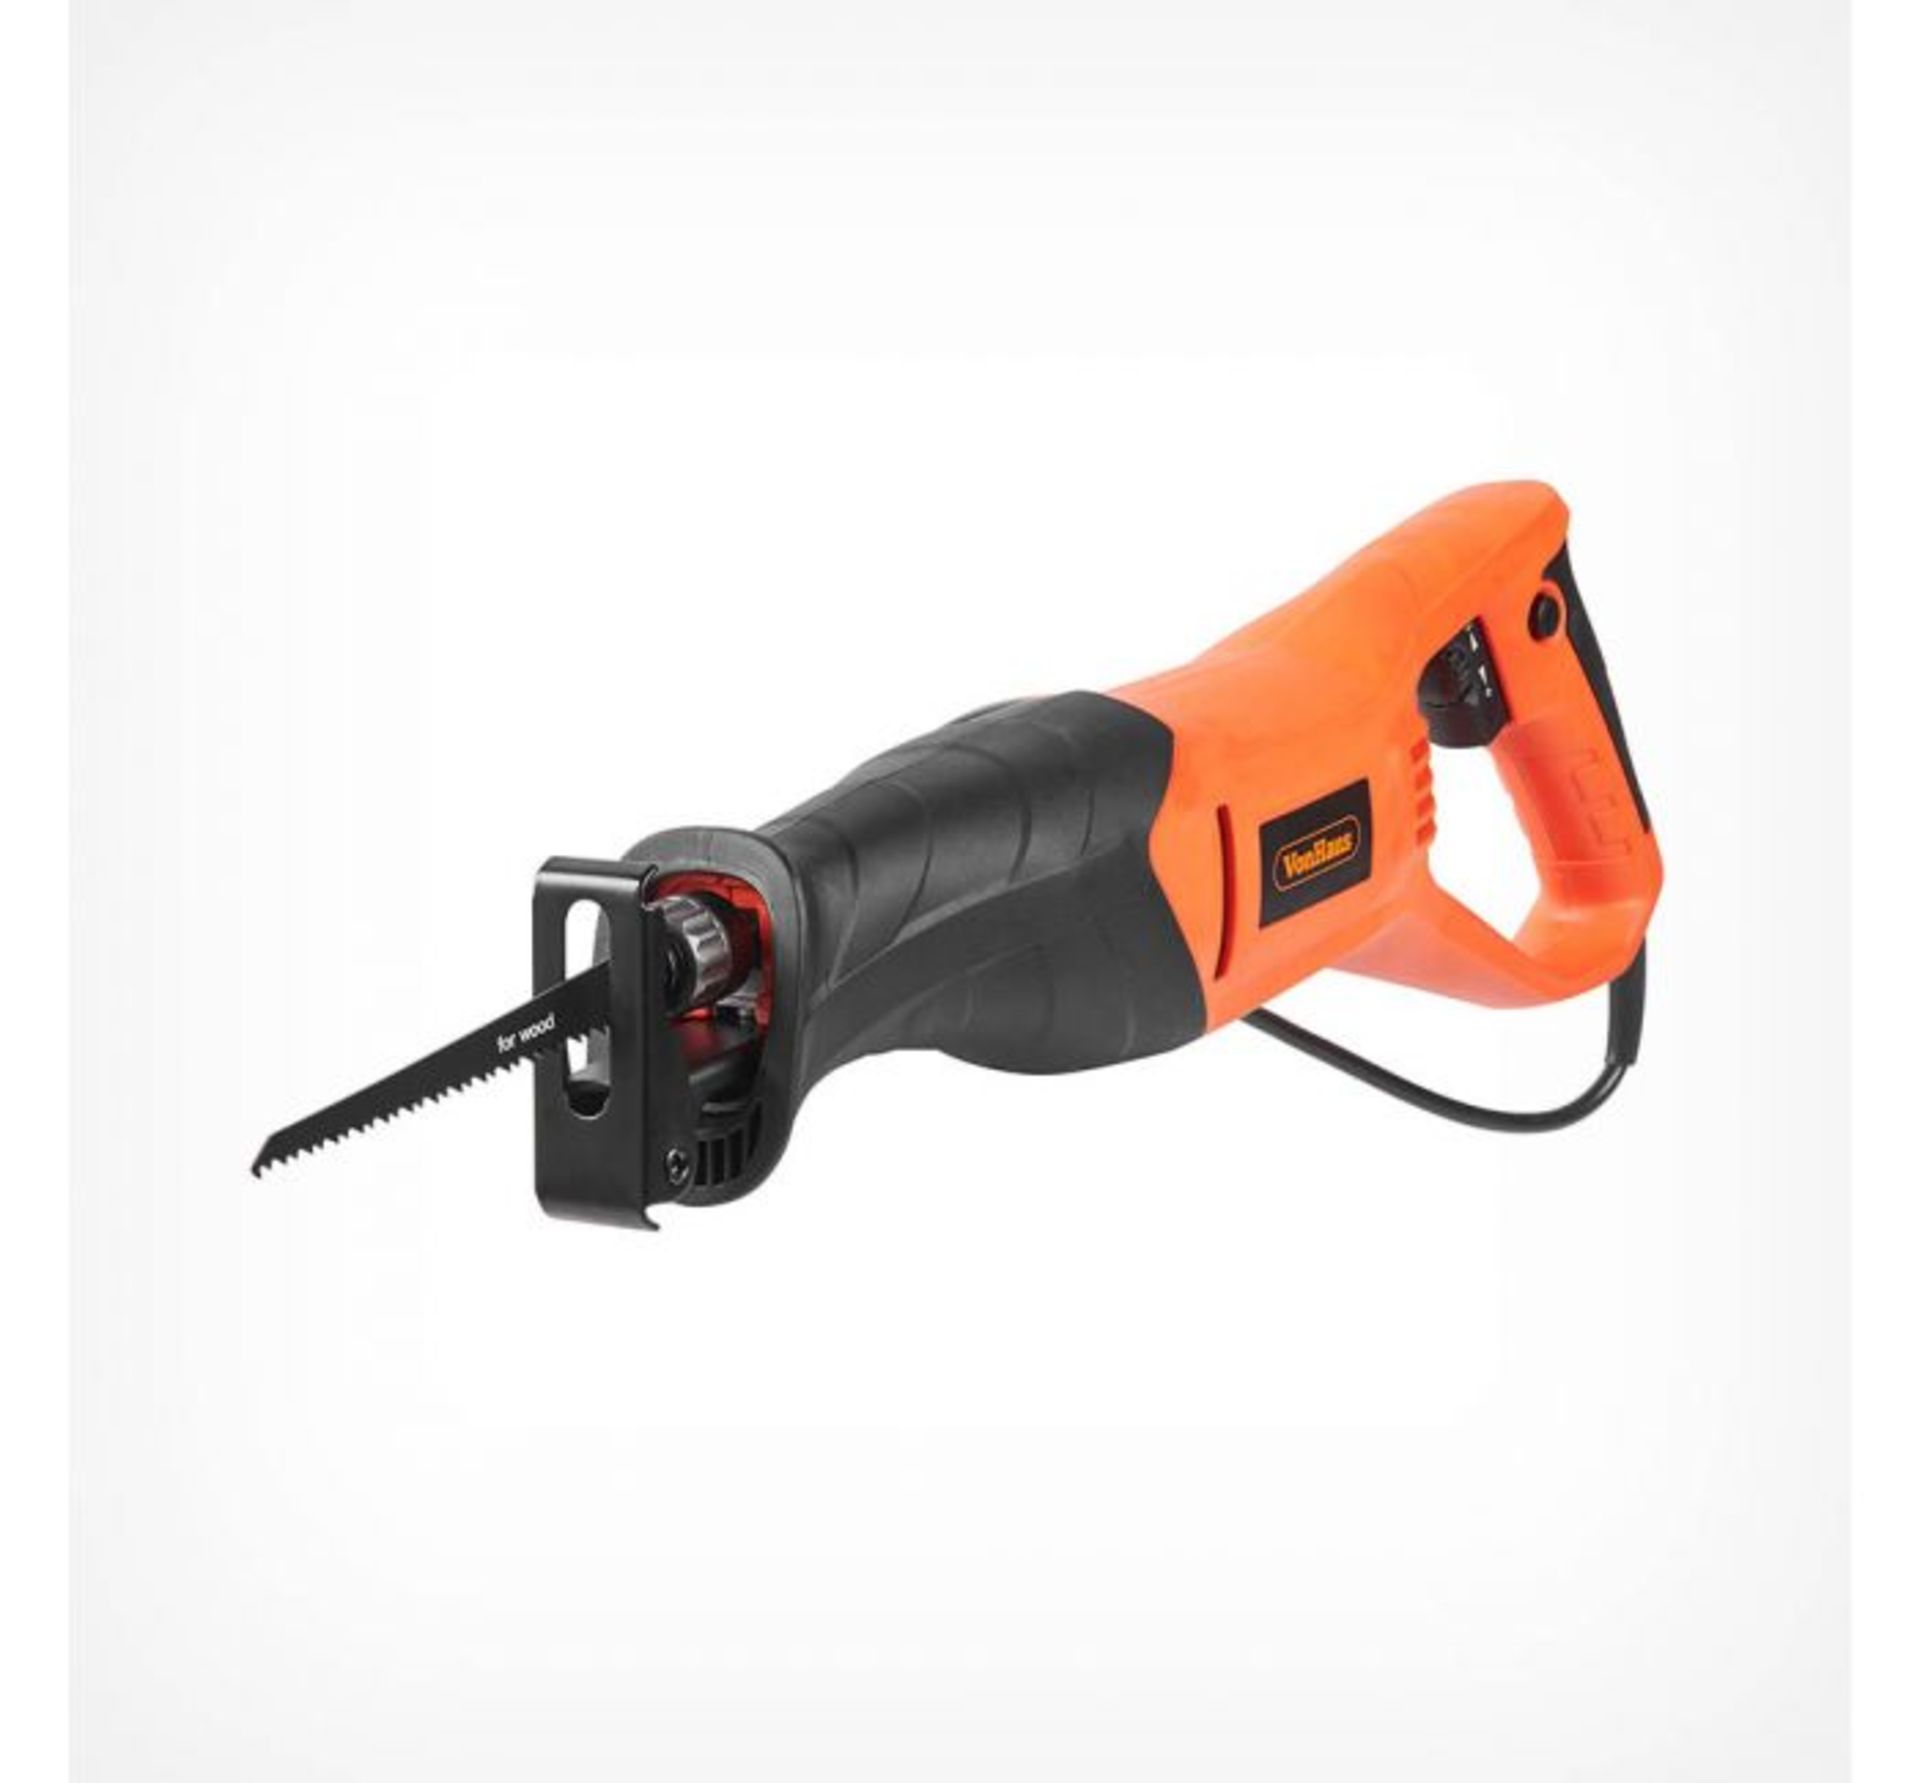 (VL24) 800W Reciprocating Saw 800W motor effortlessly powers through wood up to 105mm thick...